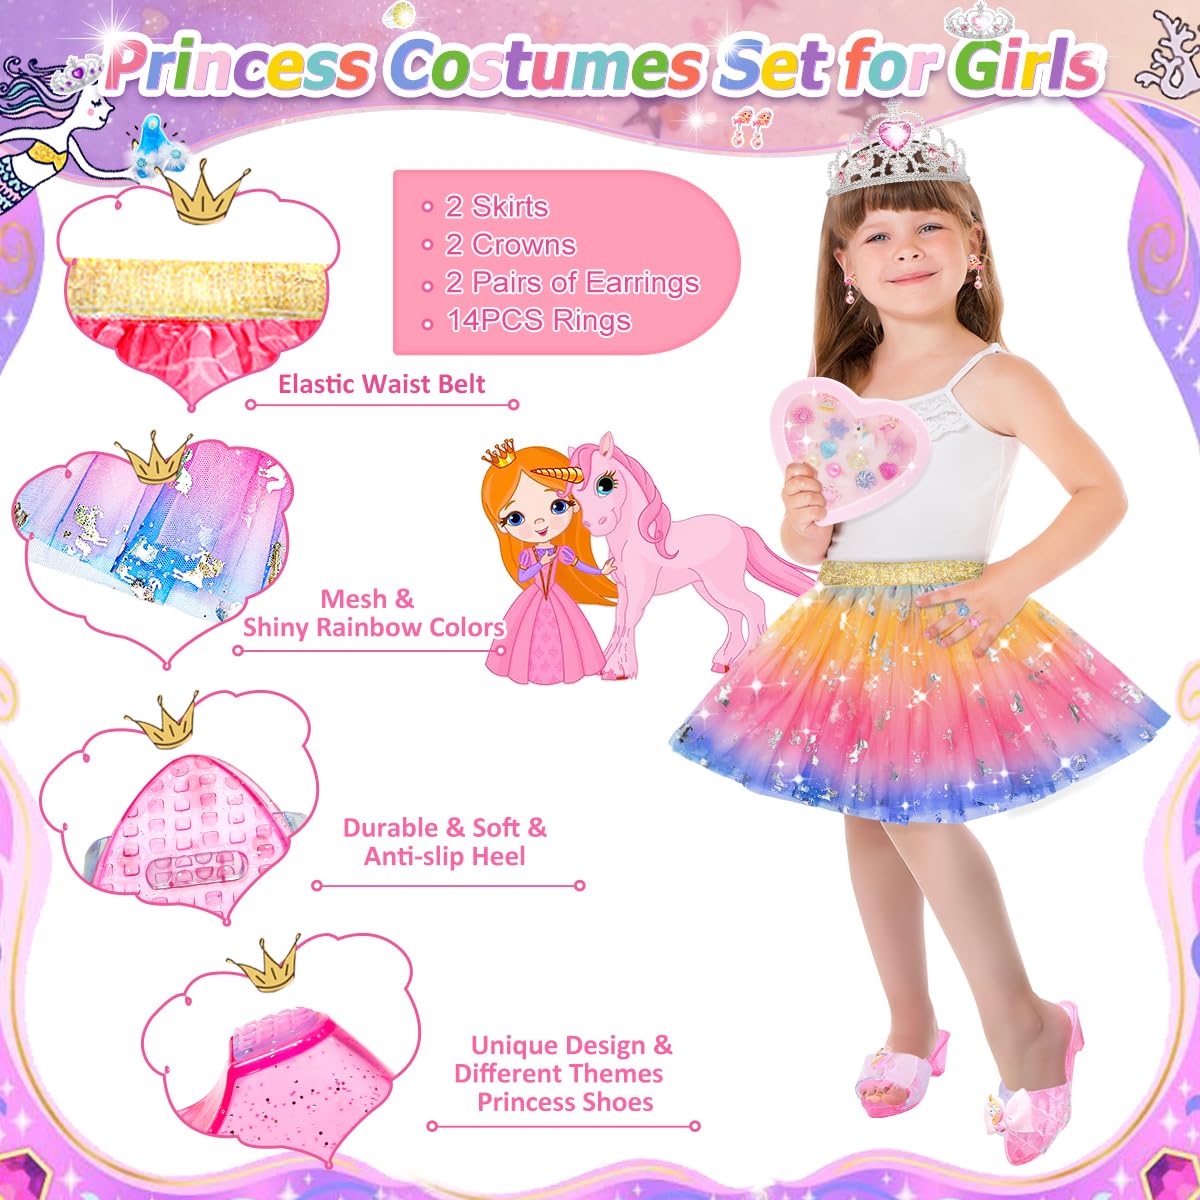 Toys for Girls,Princess Dress Up Clothes for Little Girls,Toddler Princess Girl Toys Age 4-5,Kids Toys for 3 4 5 6 7 Year Old Costume Set with Skirts,Shoes,Crowns,Christmas Birthday Gifts for Girls